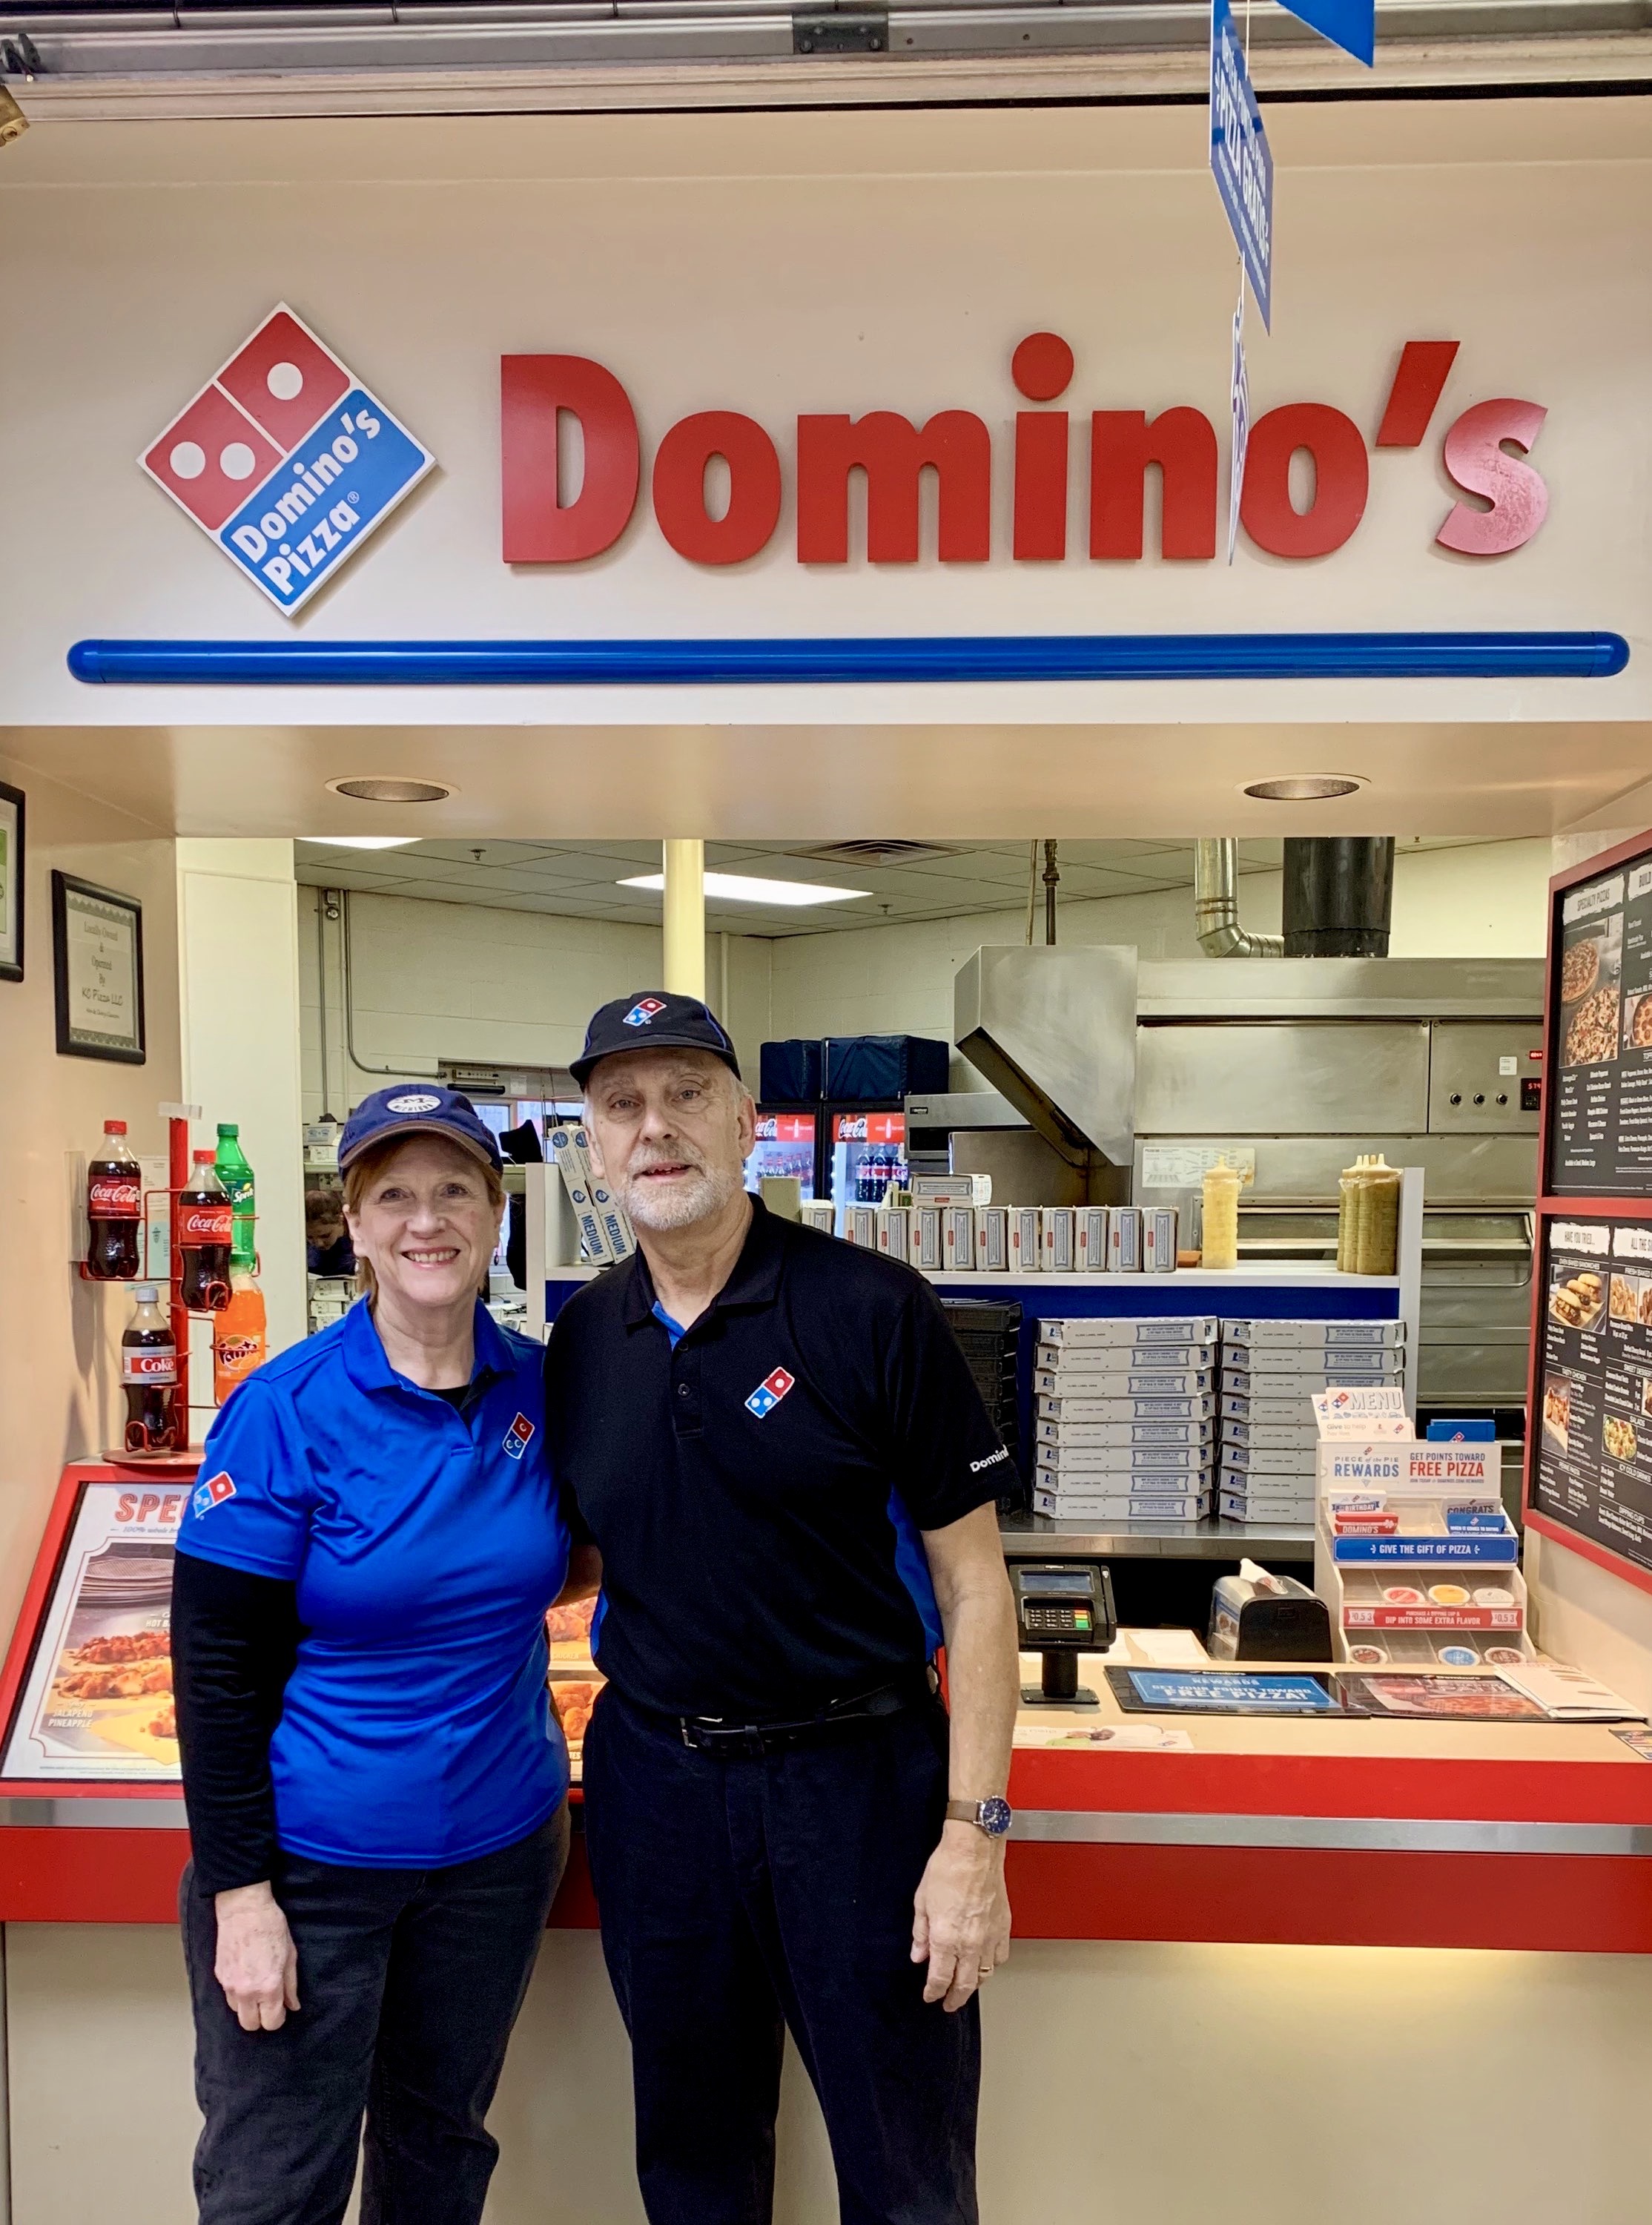 Domino’s closes, other pizzerias gain more business